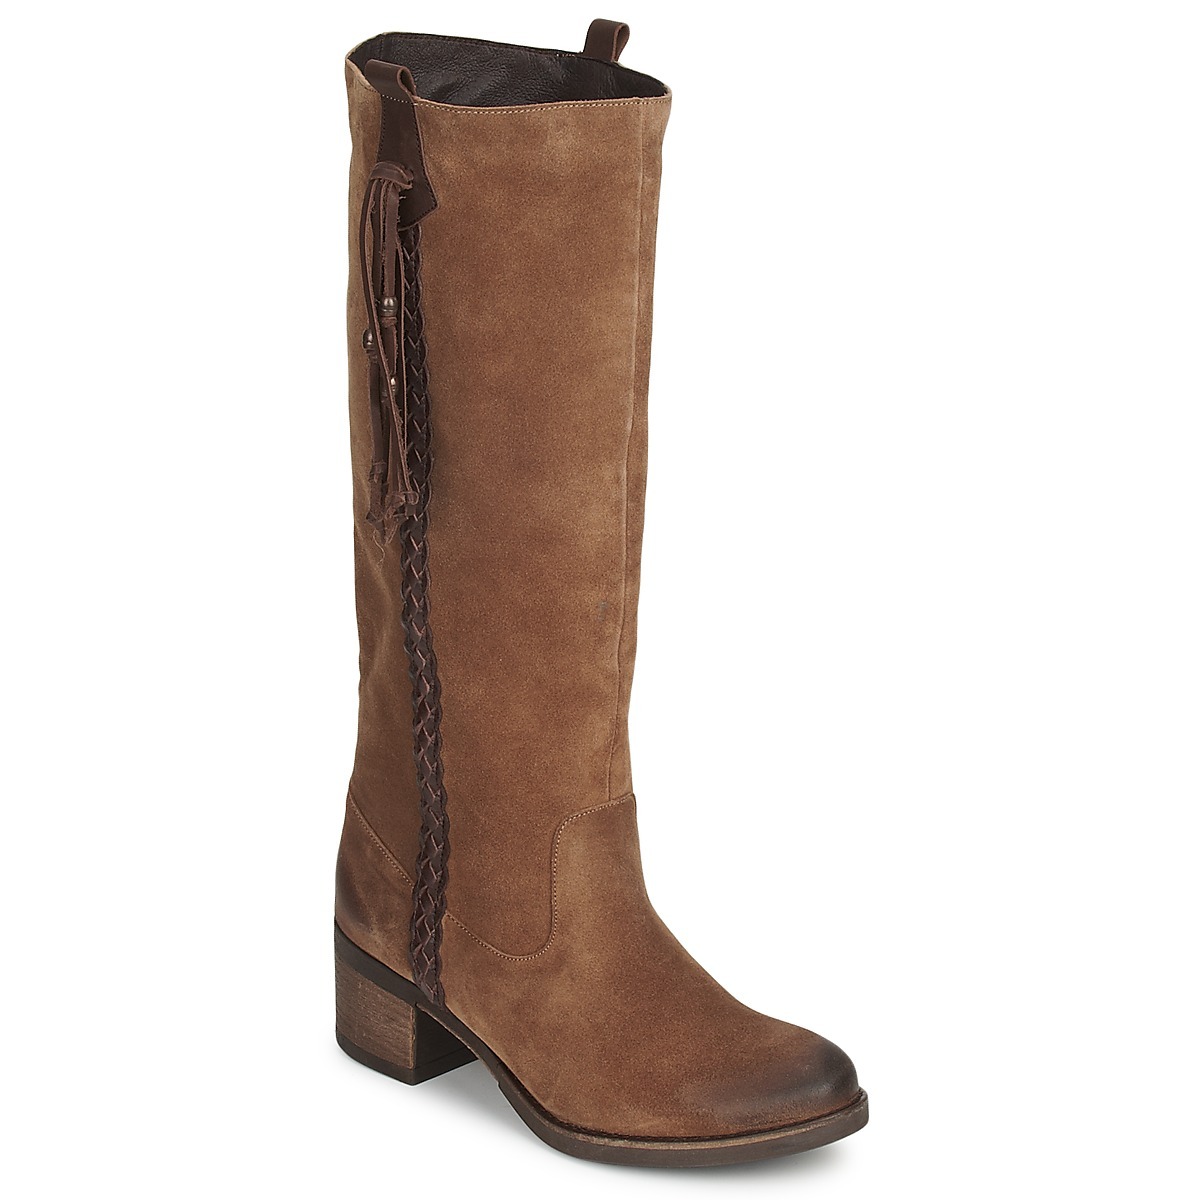 Betty London Ladies Boots Brown at Spartoo GOOFASH